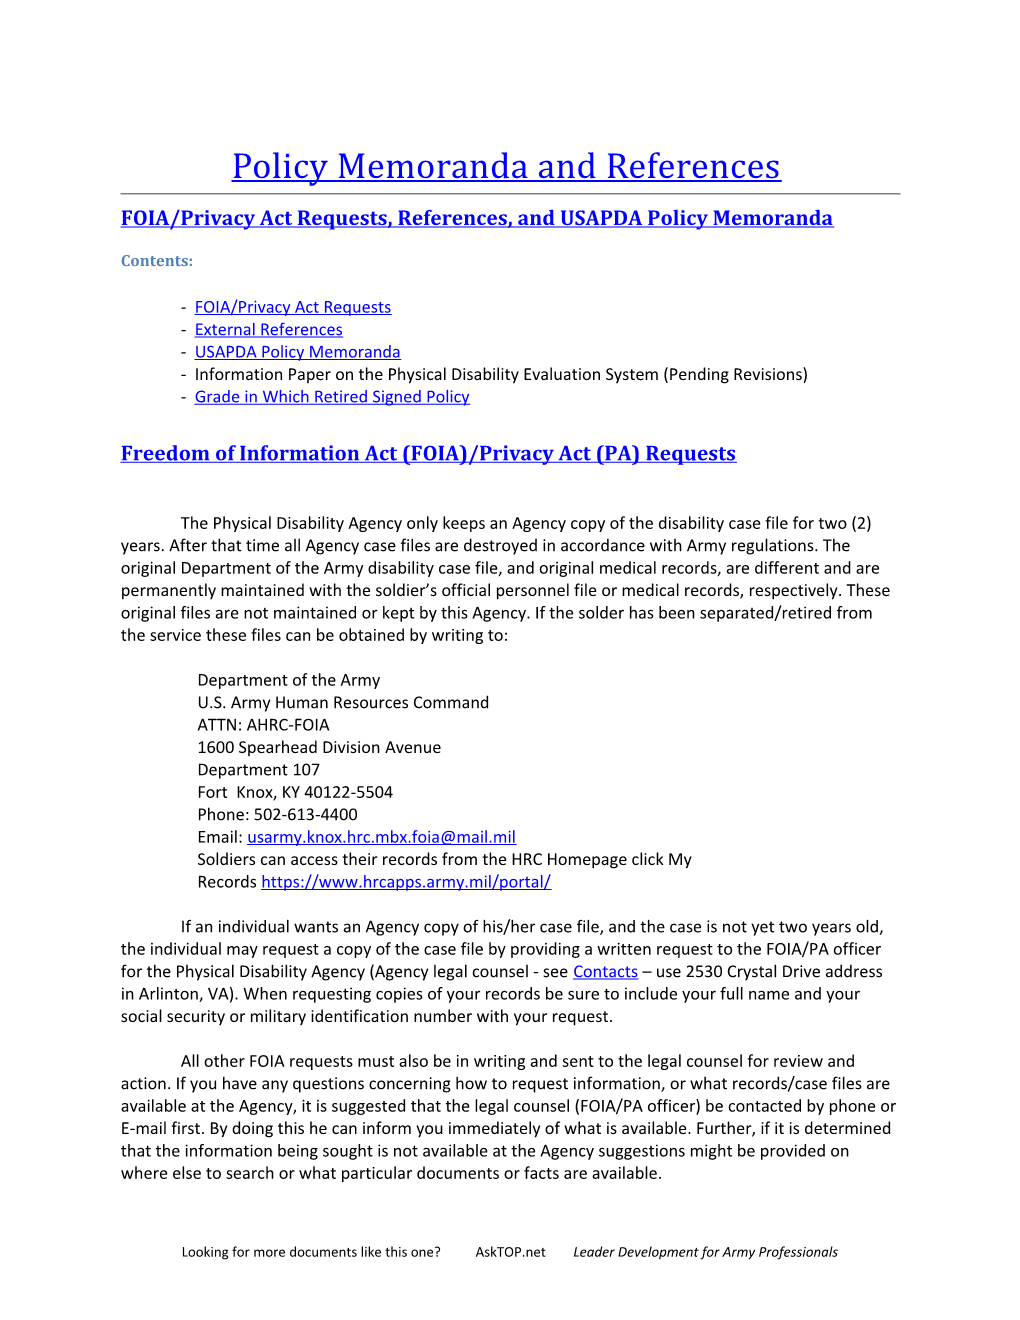 FOIA/Privacy Act Requests, References, and USAPDA Policy Memoranda